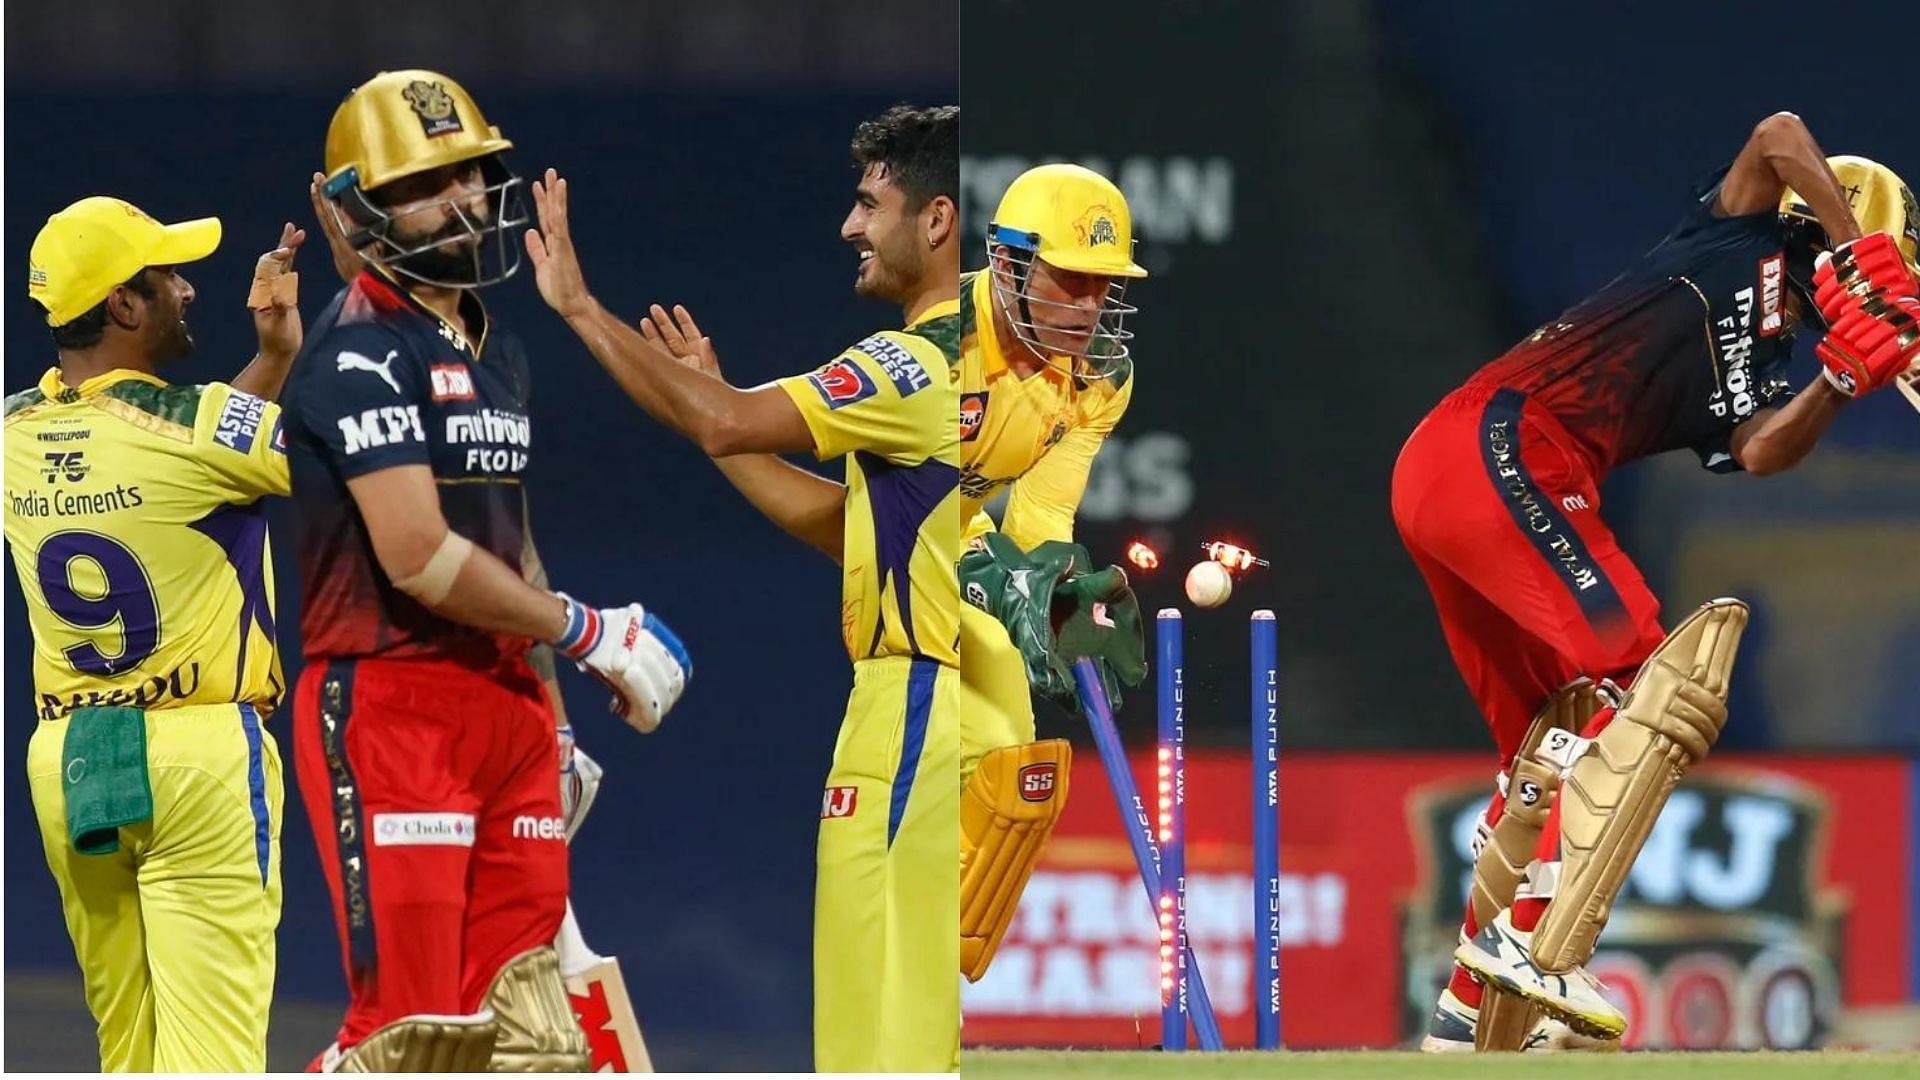 CSK had thumped RCB convincingly when the two teams met earlier this season. (P.C.:iplt20.com)